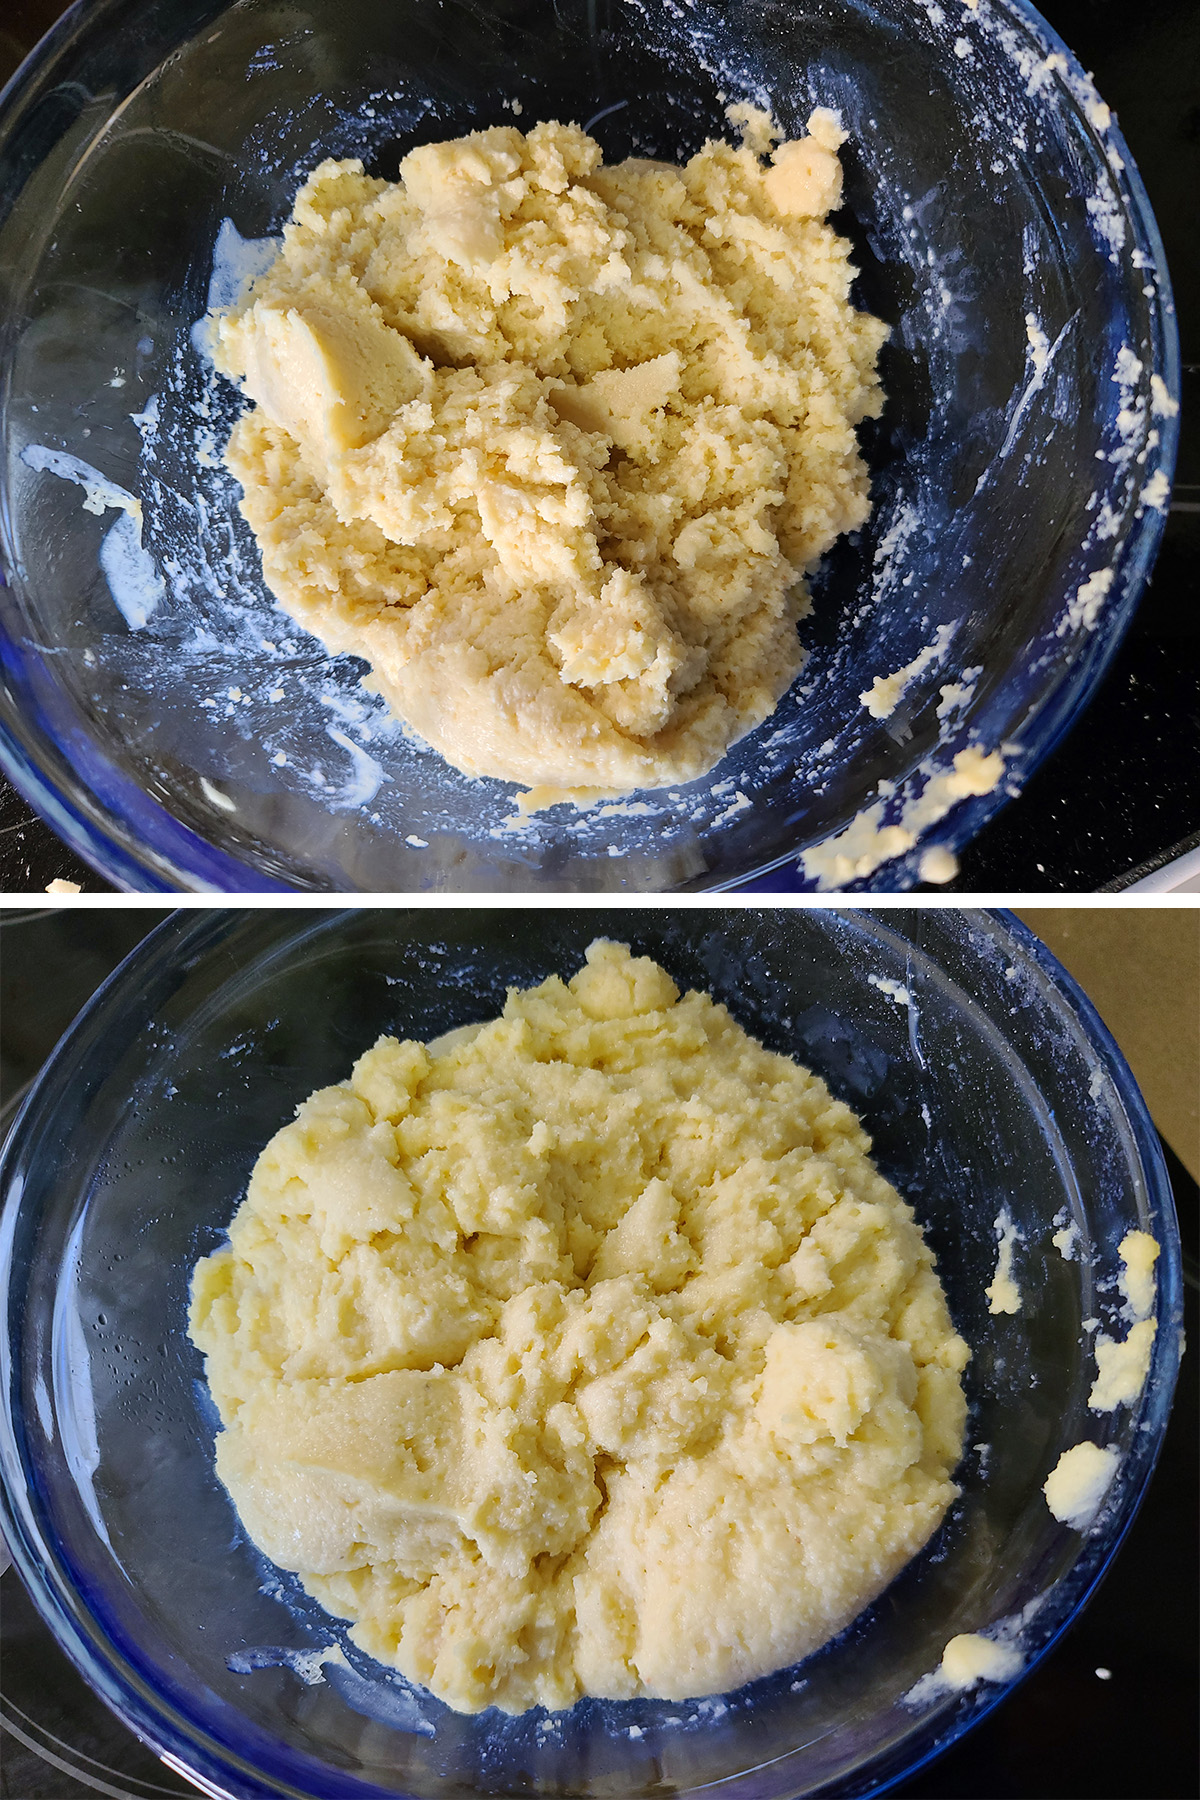 The keto manakeesh dough, before and after the first rise.